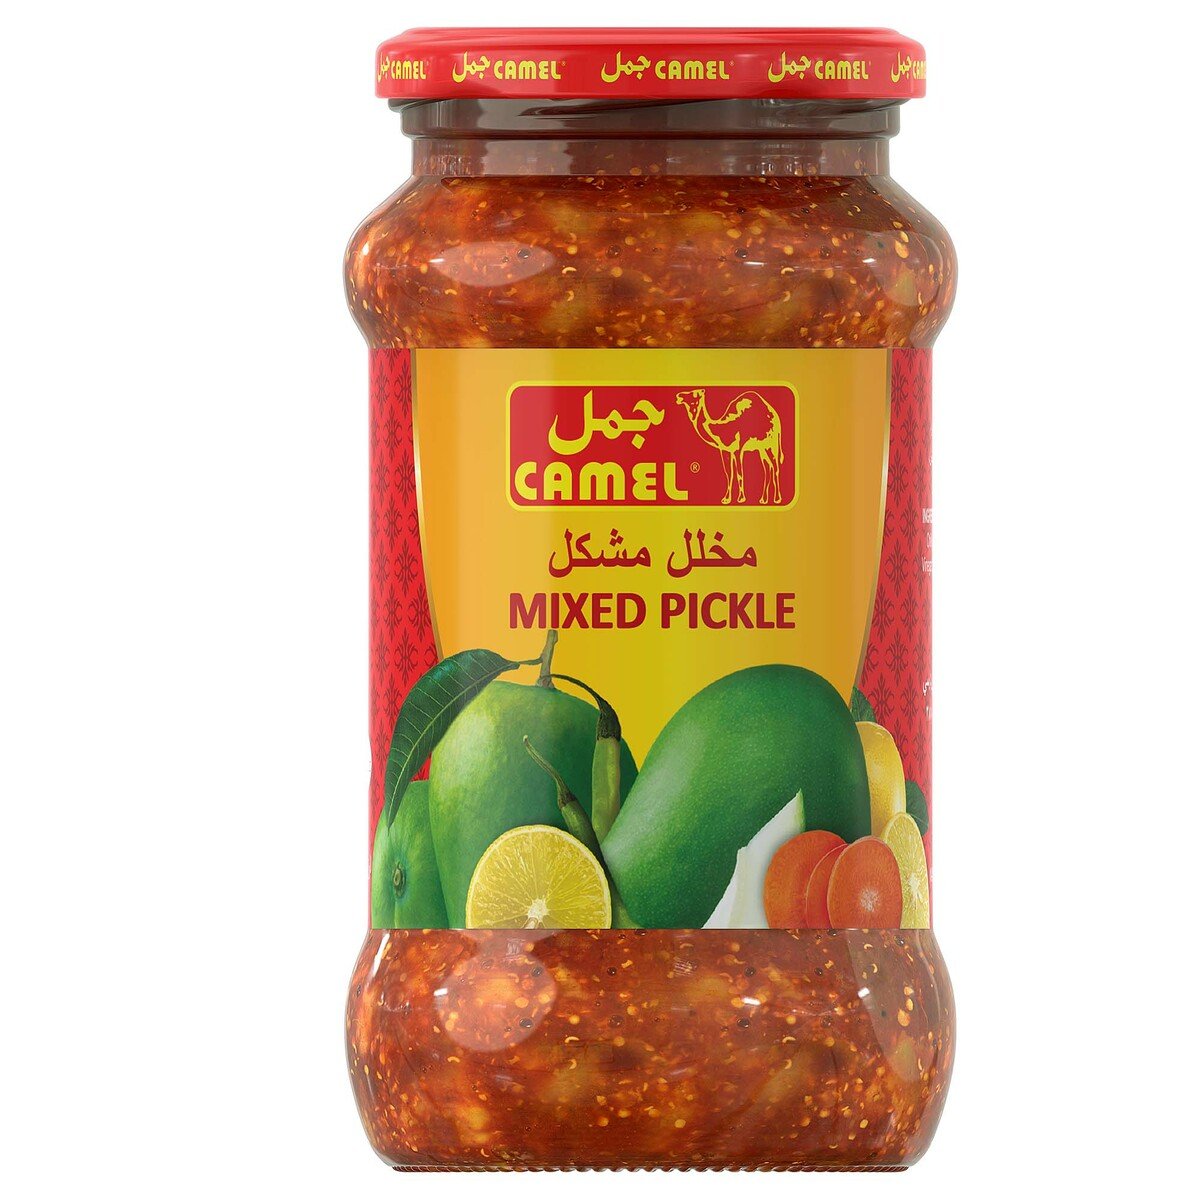 Camel Mixed Pickle 400g